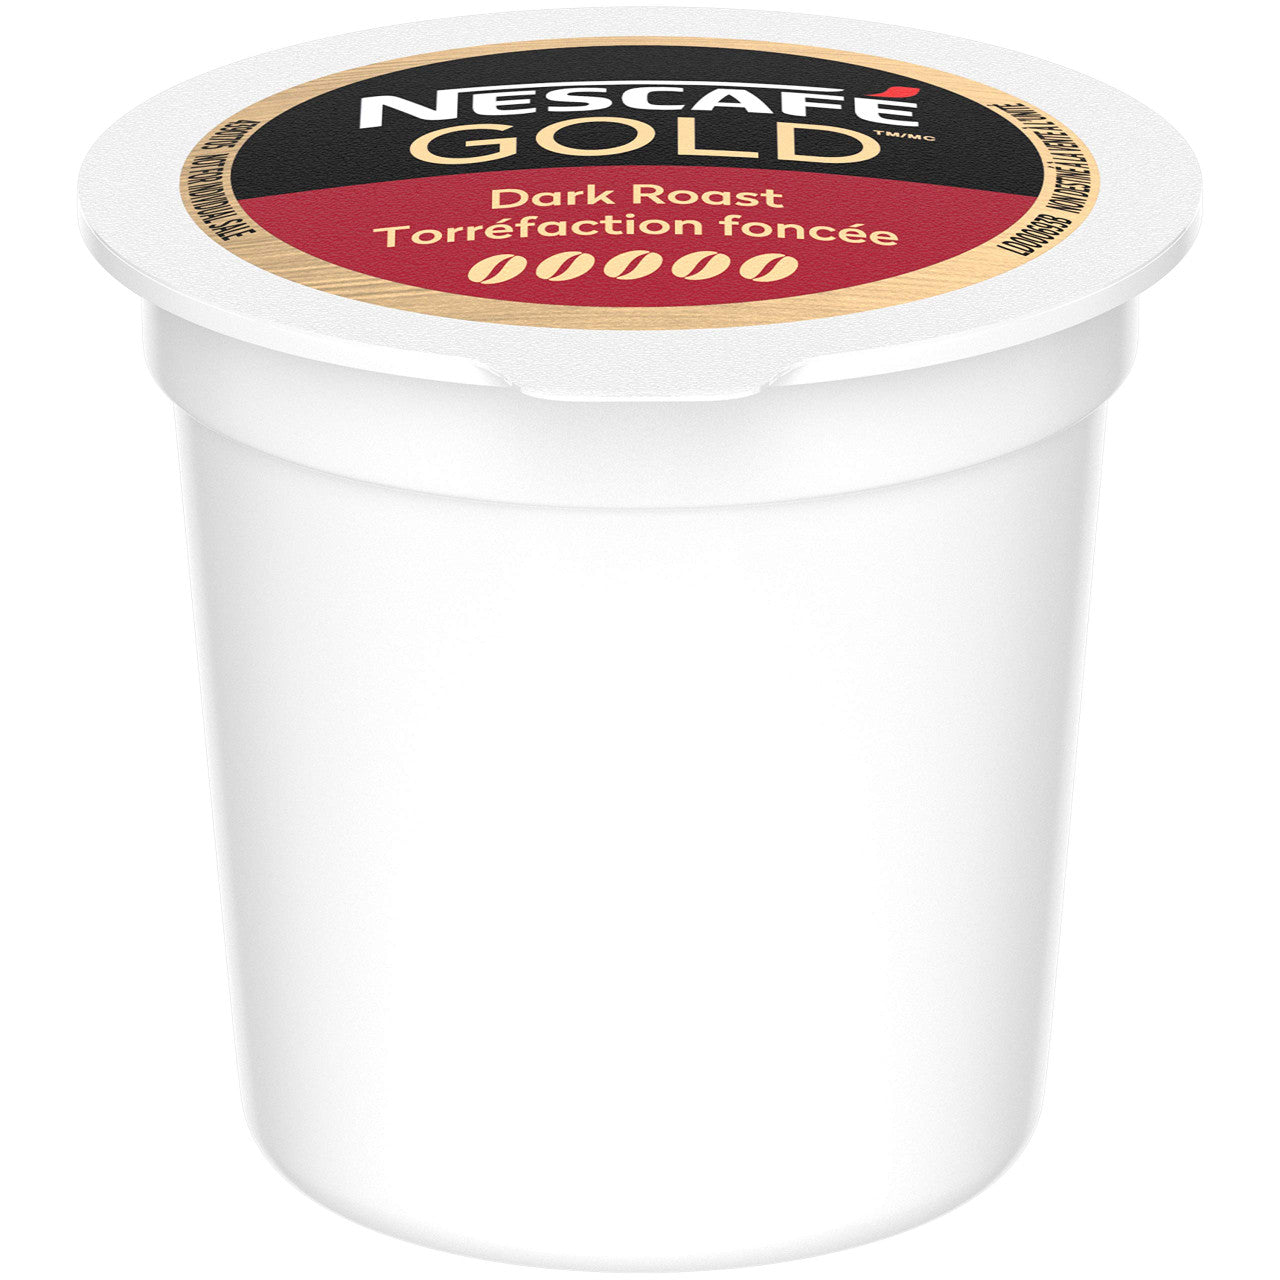 NESCAFE Gold, Dark Roast, Keurig, 12 Count Pods,  {Imported from Canada}